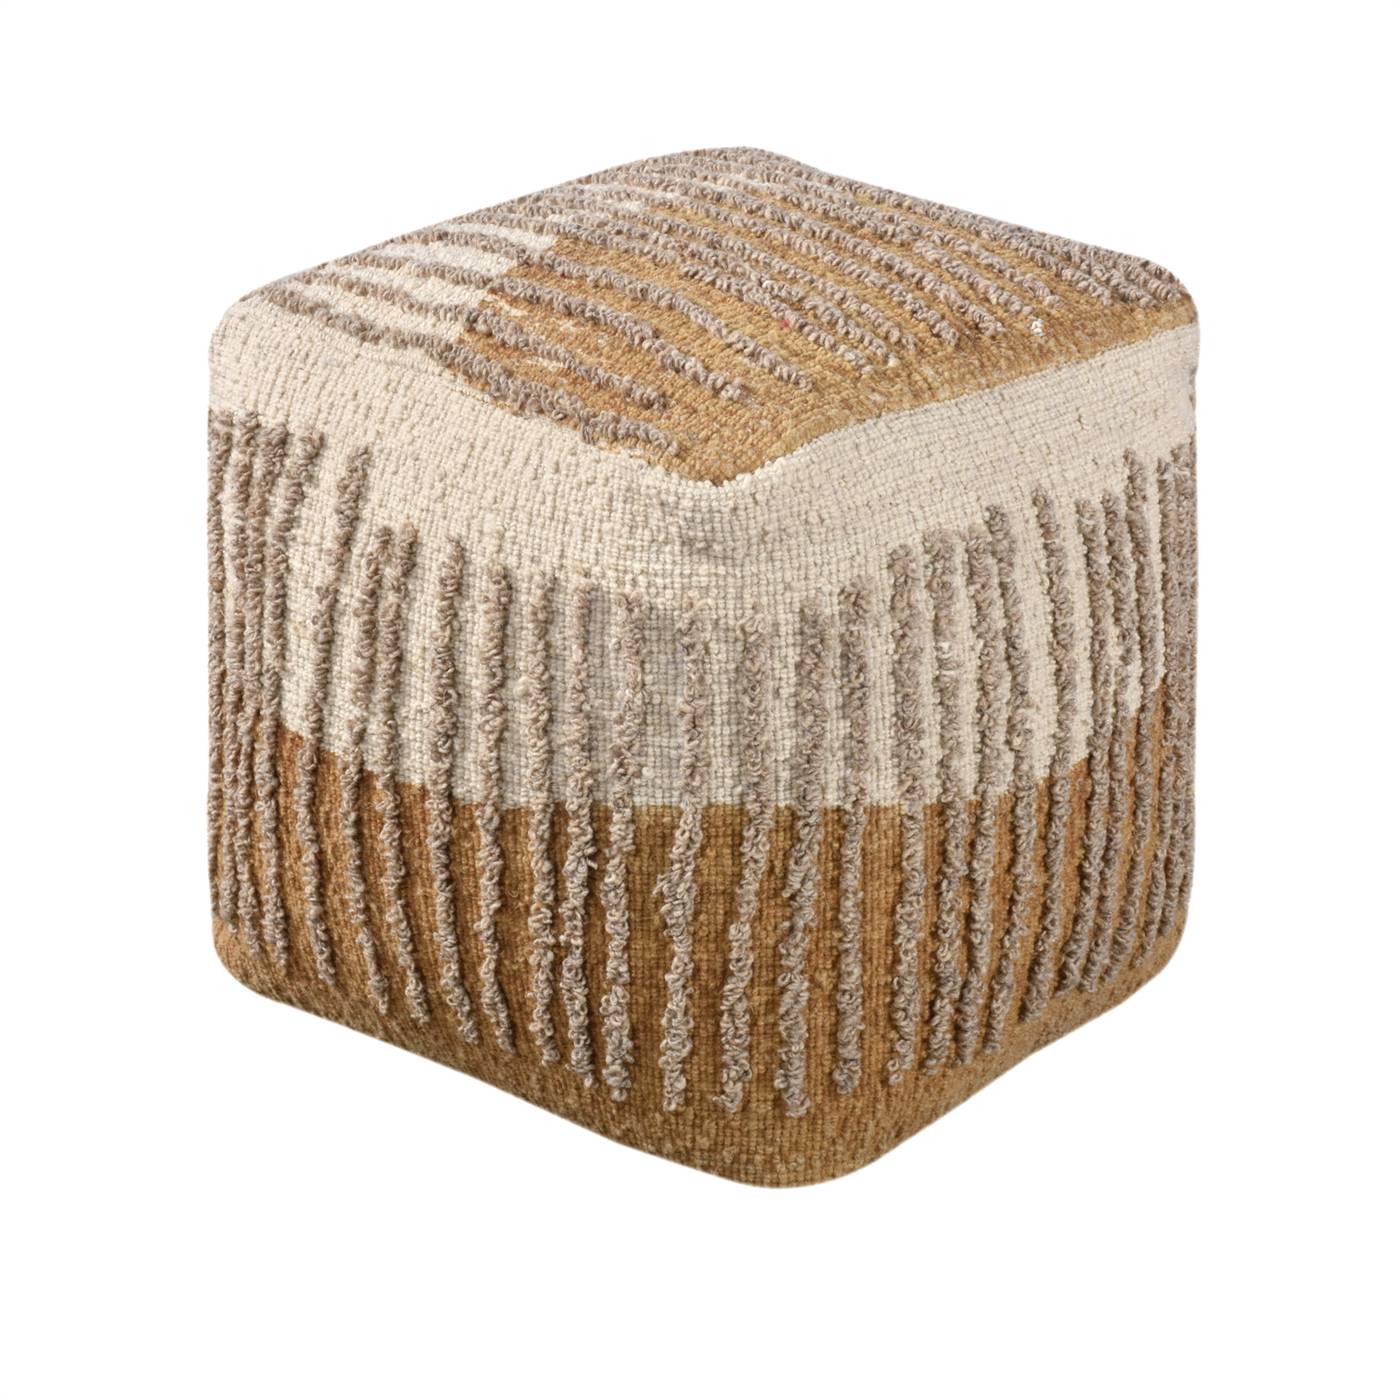 Lilah Pouf, 40x40x40 cm, Natural White, Gold, Wool, Hand Woven, Printed, Handwoven, All Loop